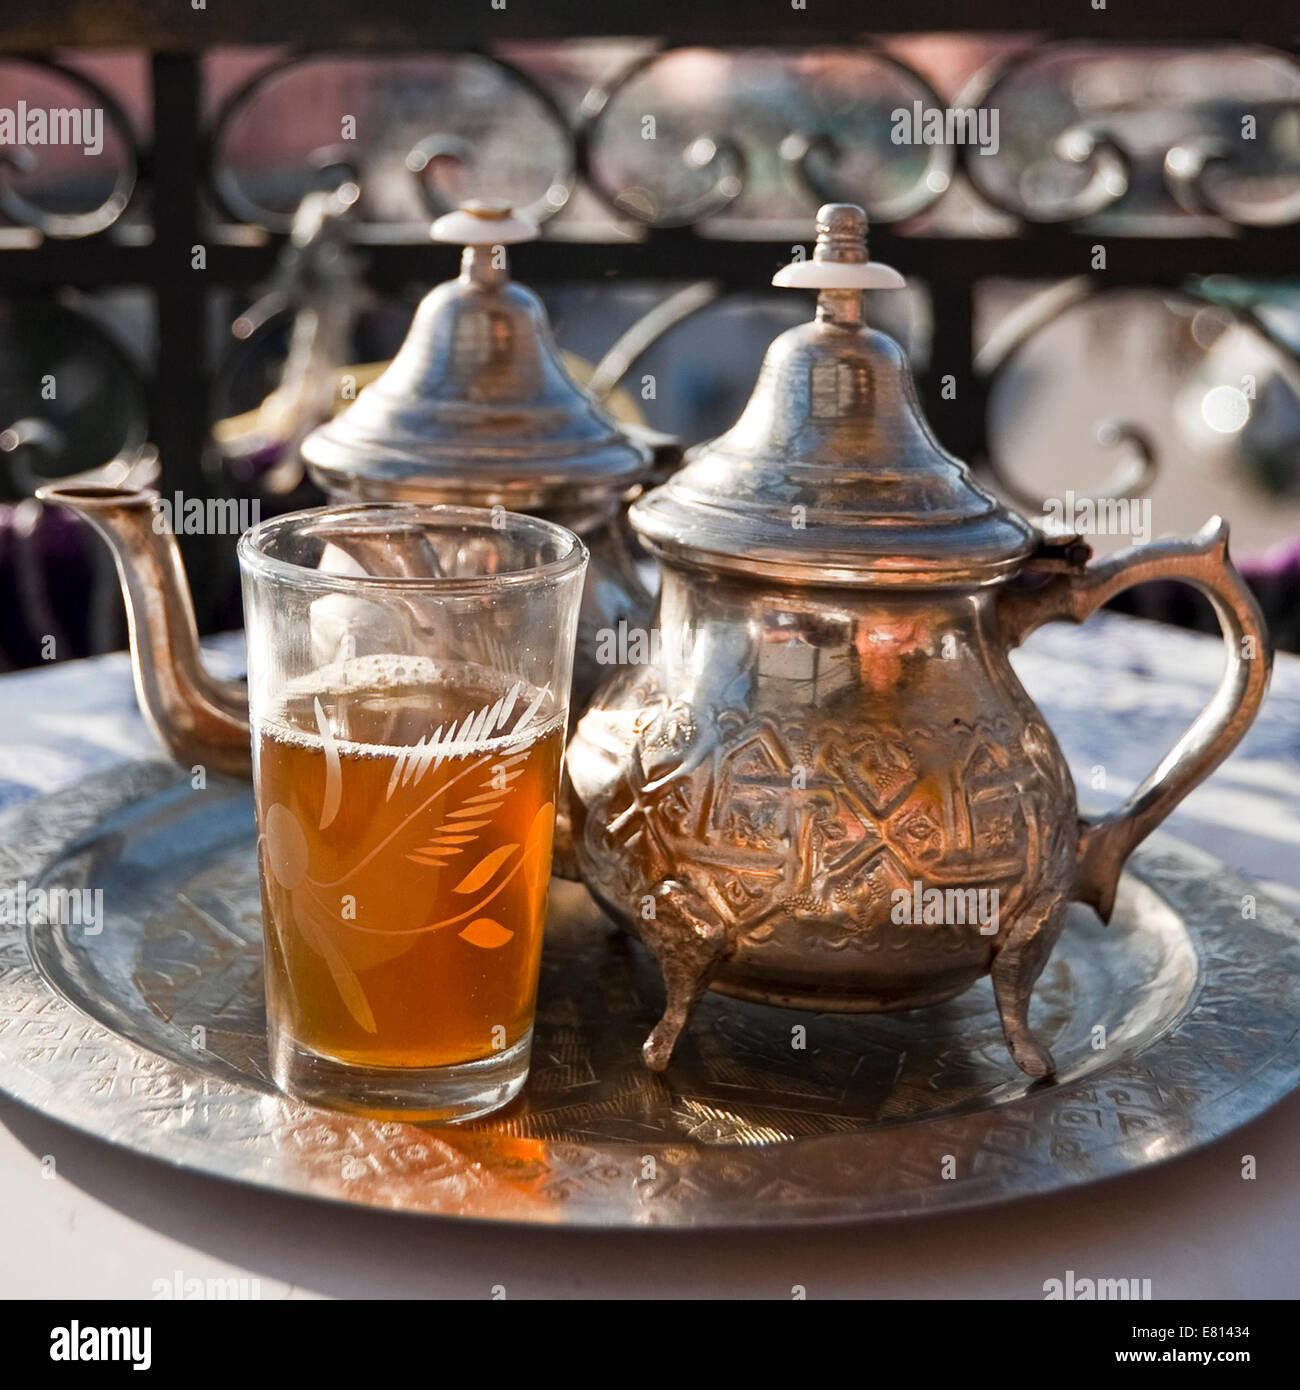 Square close up of traditional mint tea served overlooking Place Jemaa el-Fnaa in Marrakech. Stock Photo